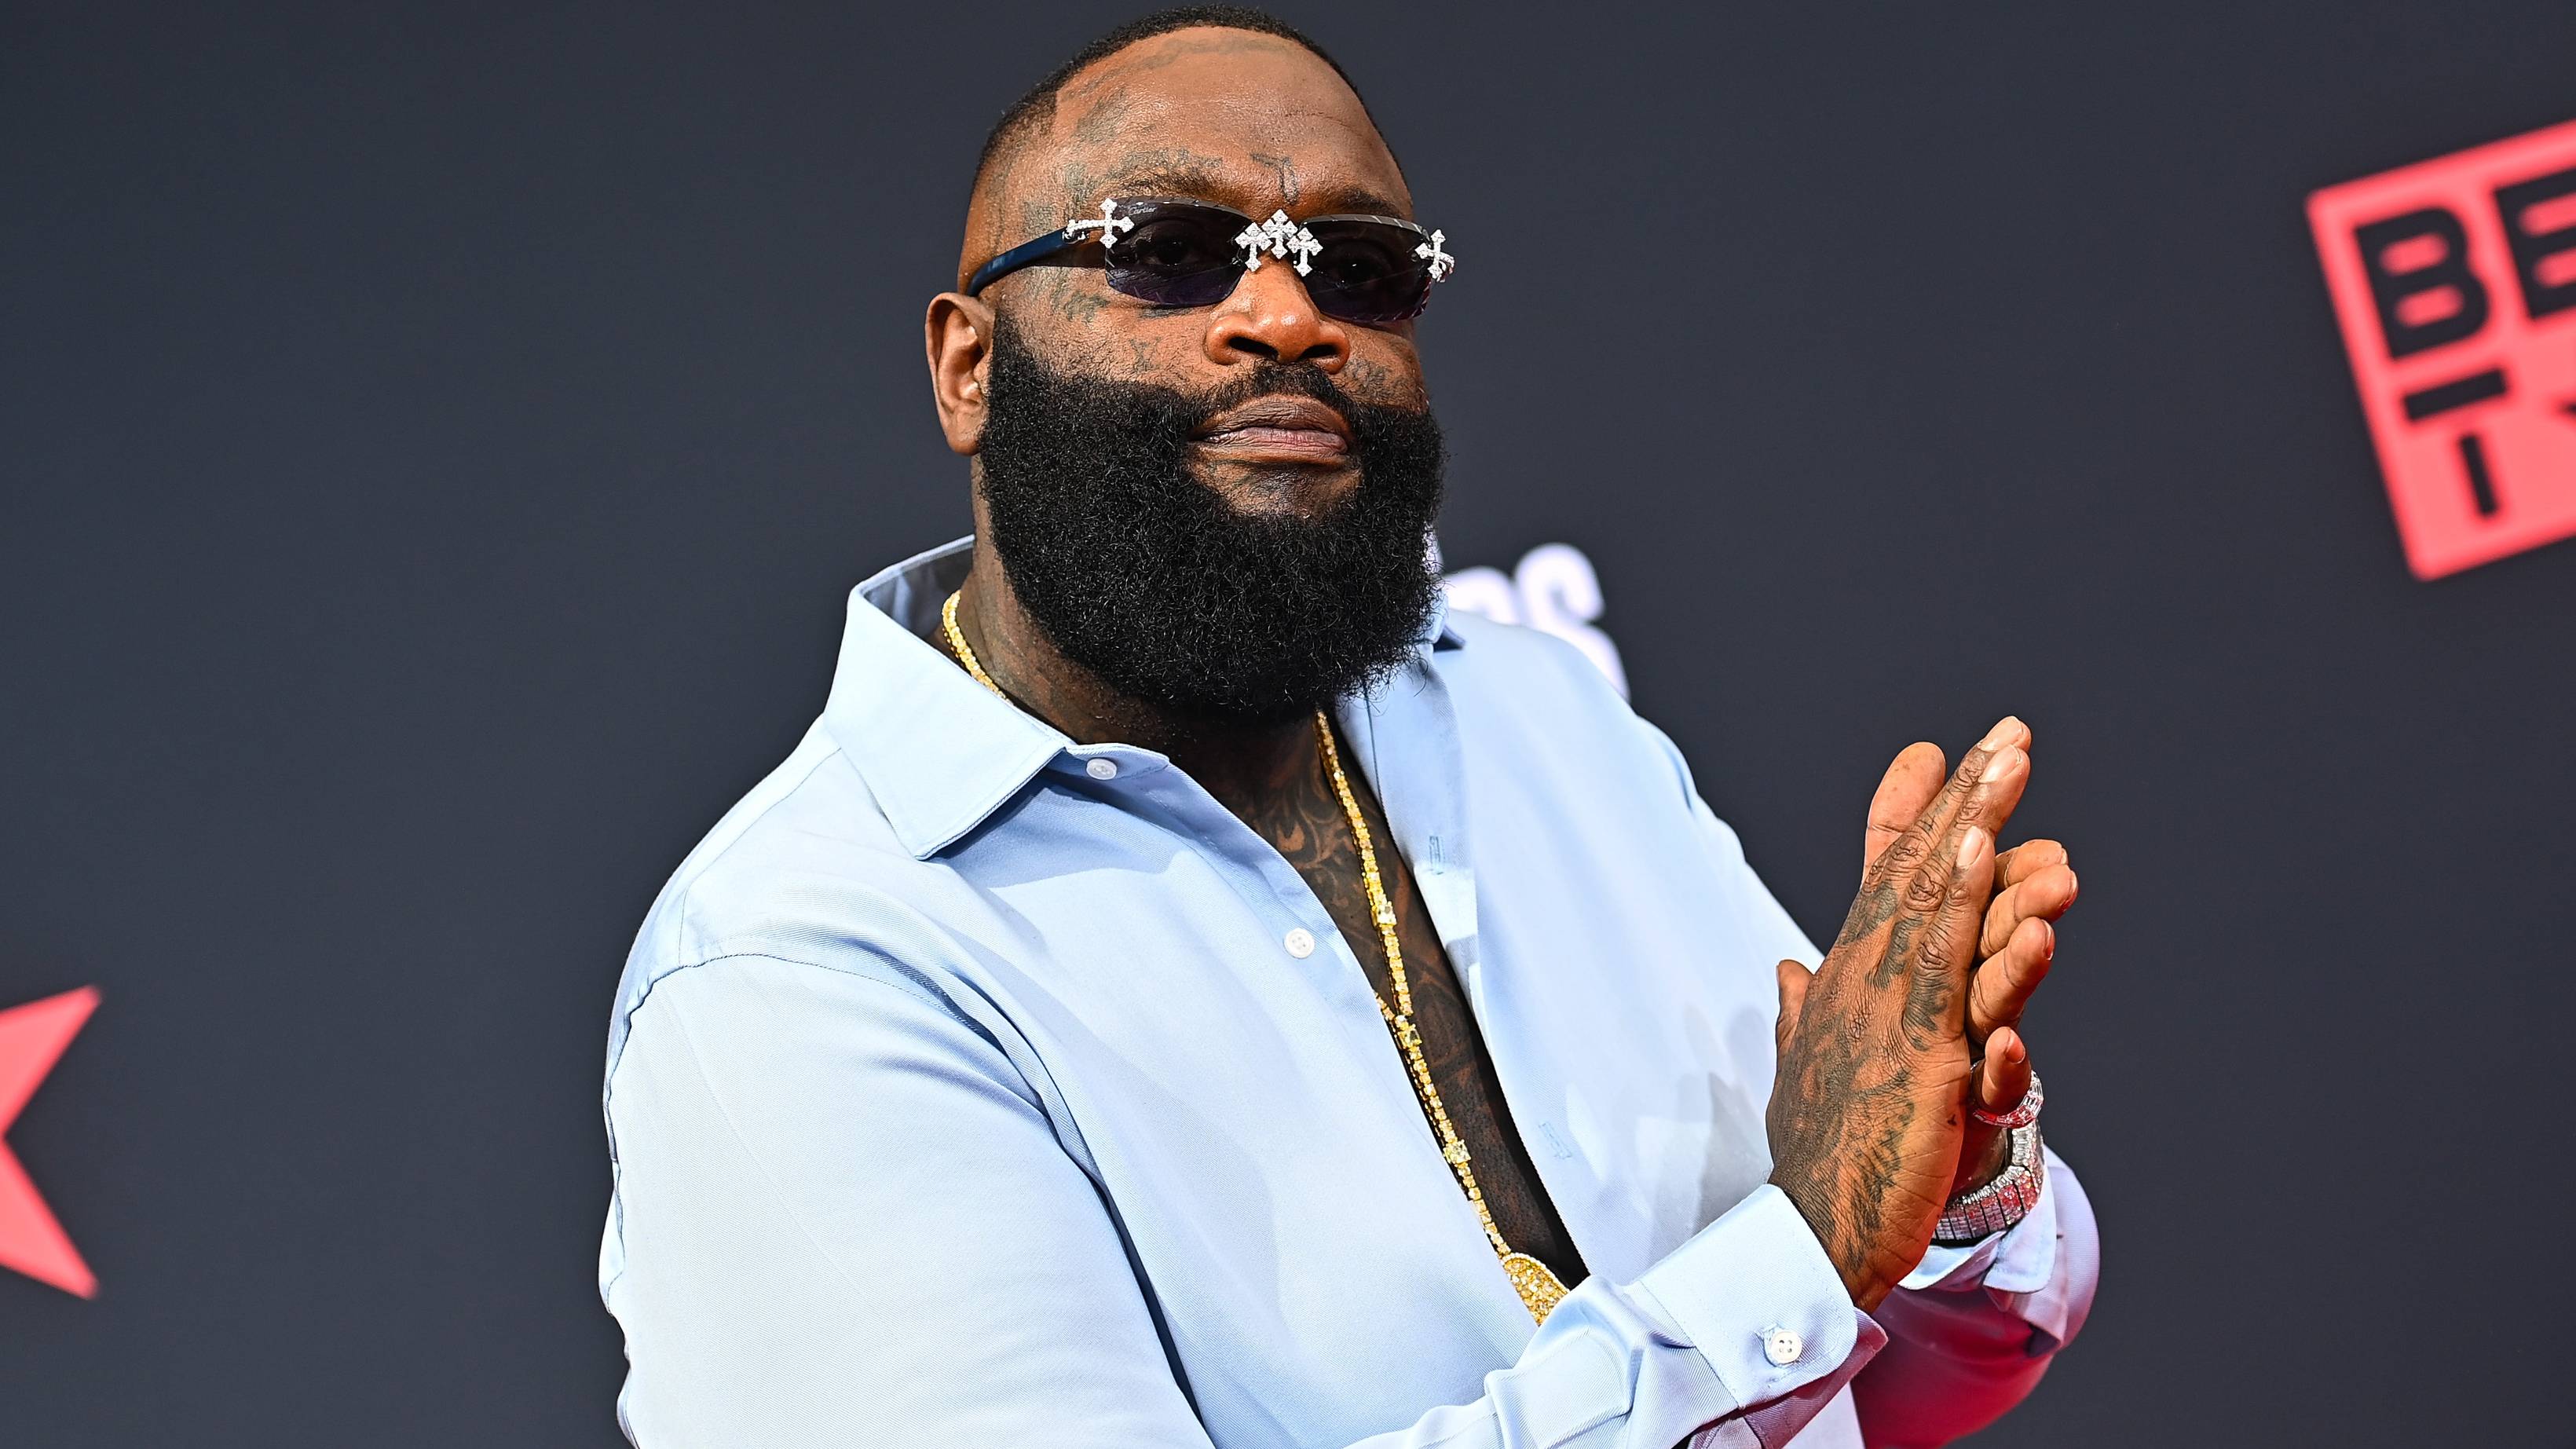 theTUNDRA on X: Rap Artist Rick Ross's Car & Bike Spectacular Click  here:  Last weekend's star-&-diamond studded car  show a new kind of spectacle #carshow #rickrosscarshow #rickross #music  #rap #hiphop #classiccars #